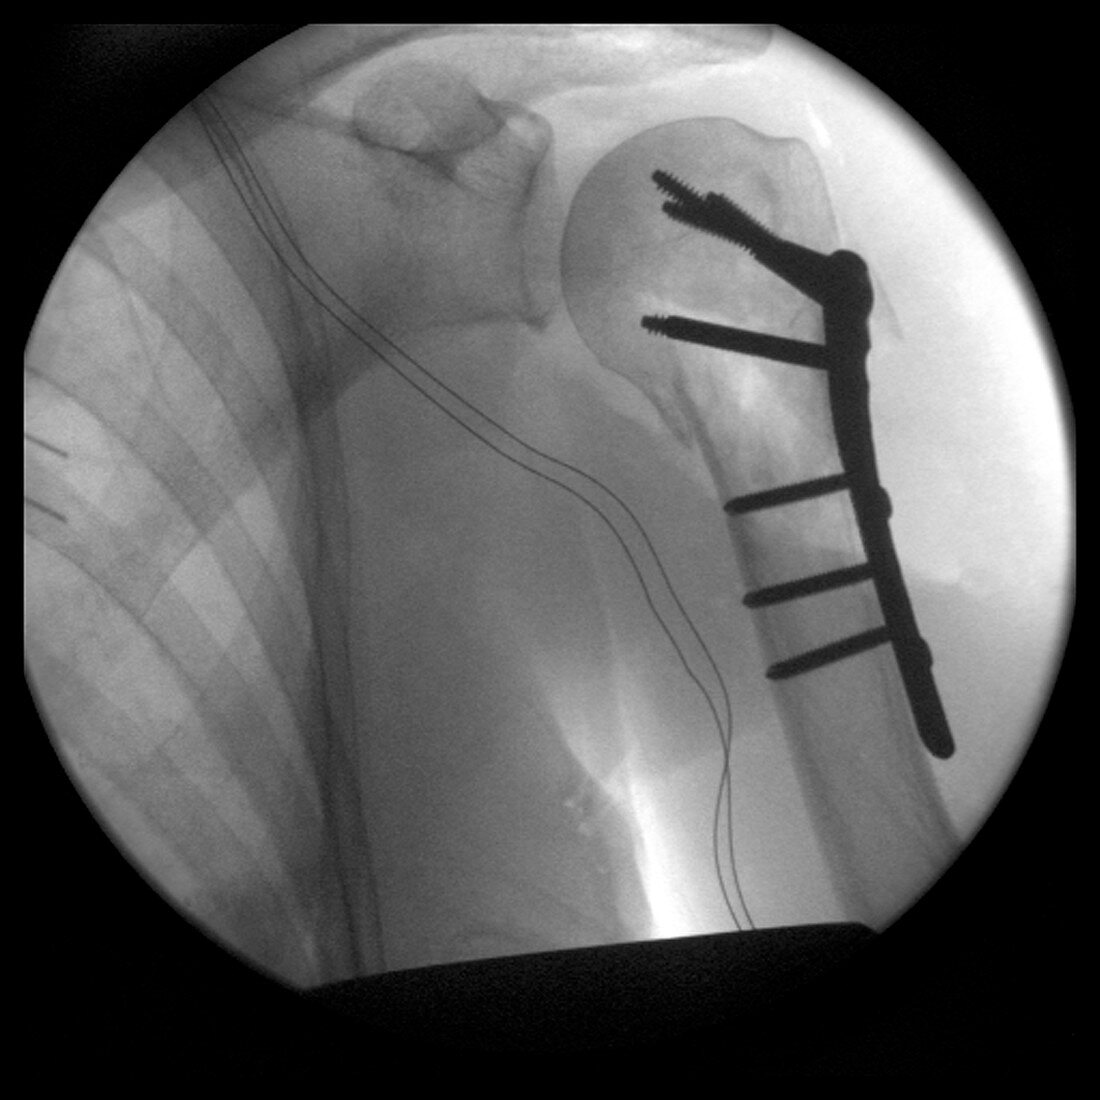 Pinned fracture of arm image 2 of 7